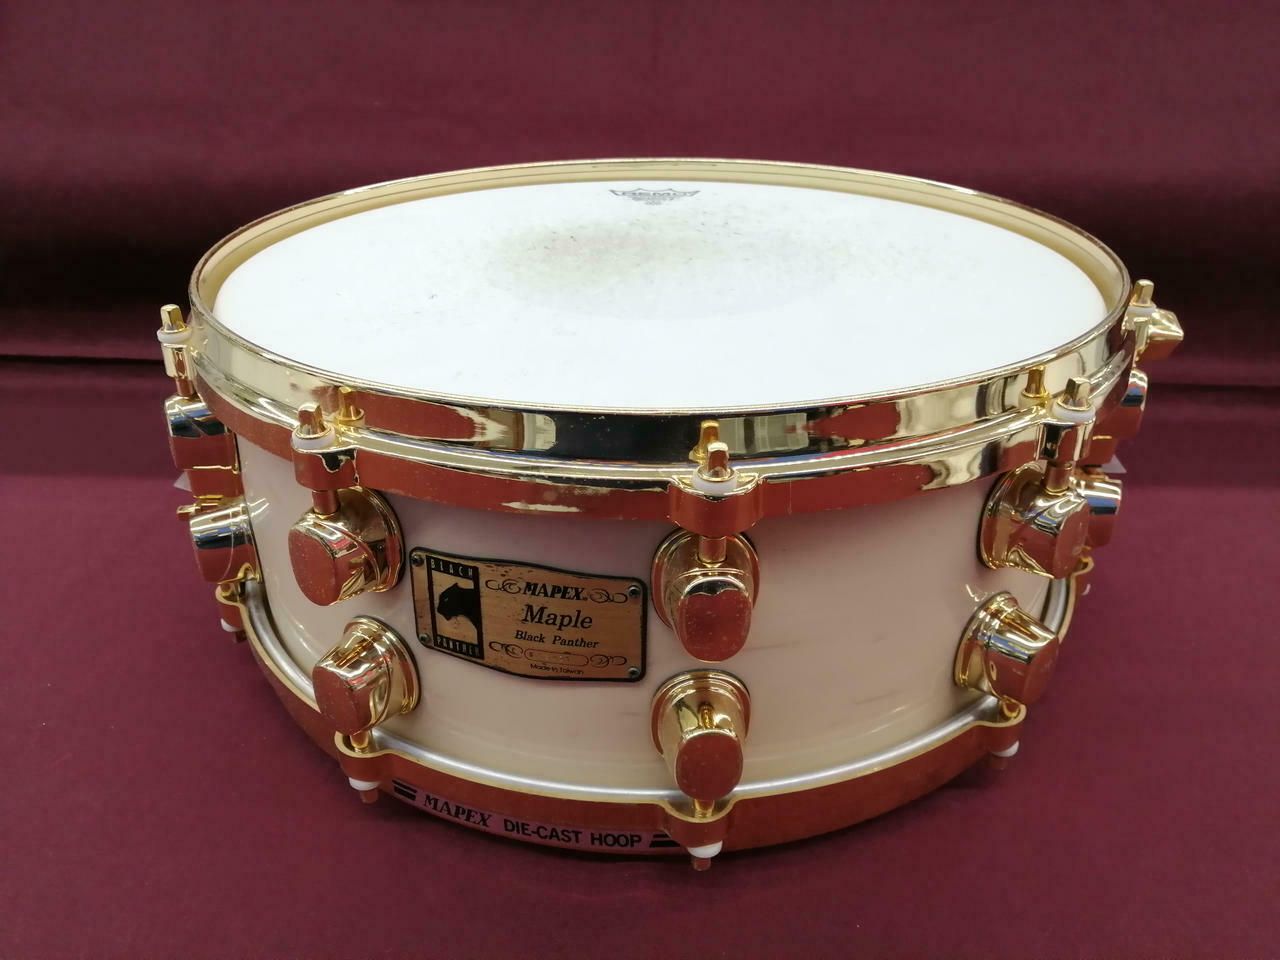 14 x 5.5 Early Taiwanese White and Gold Maple